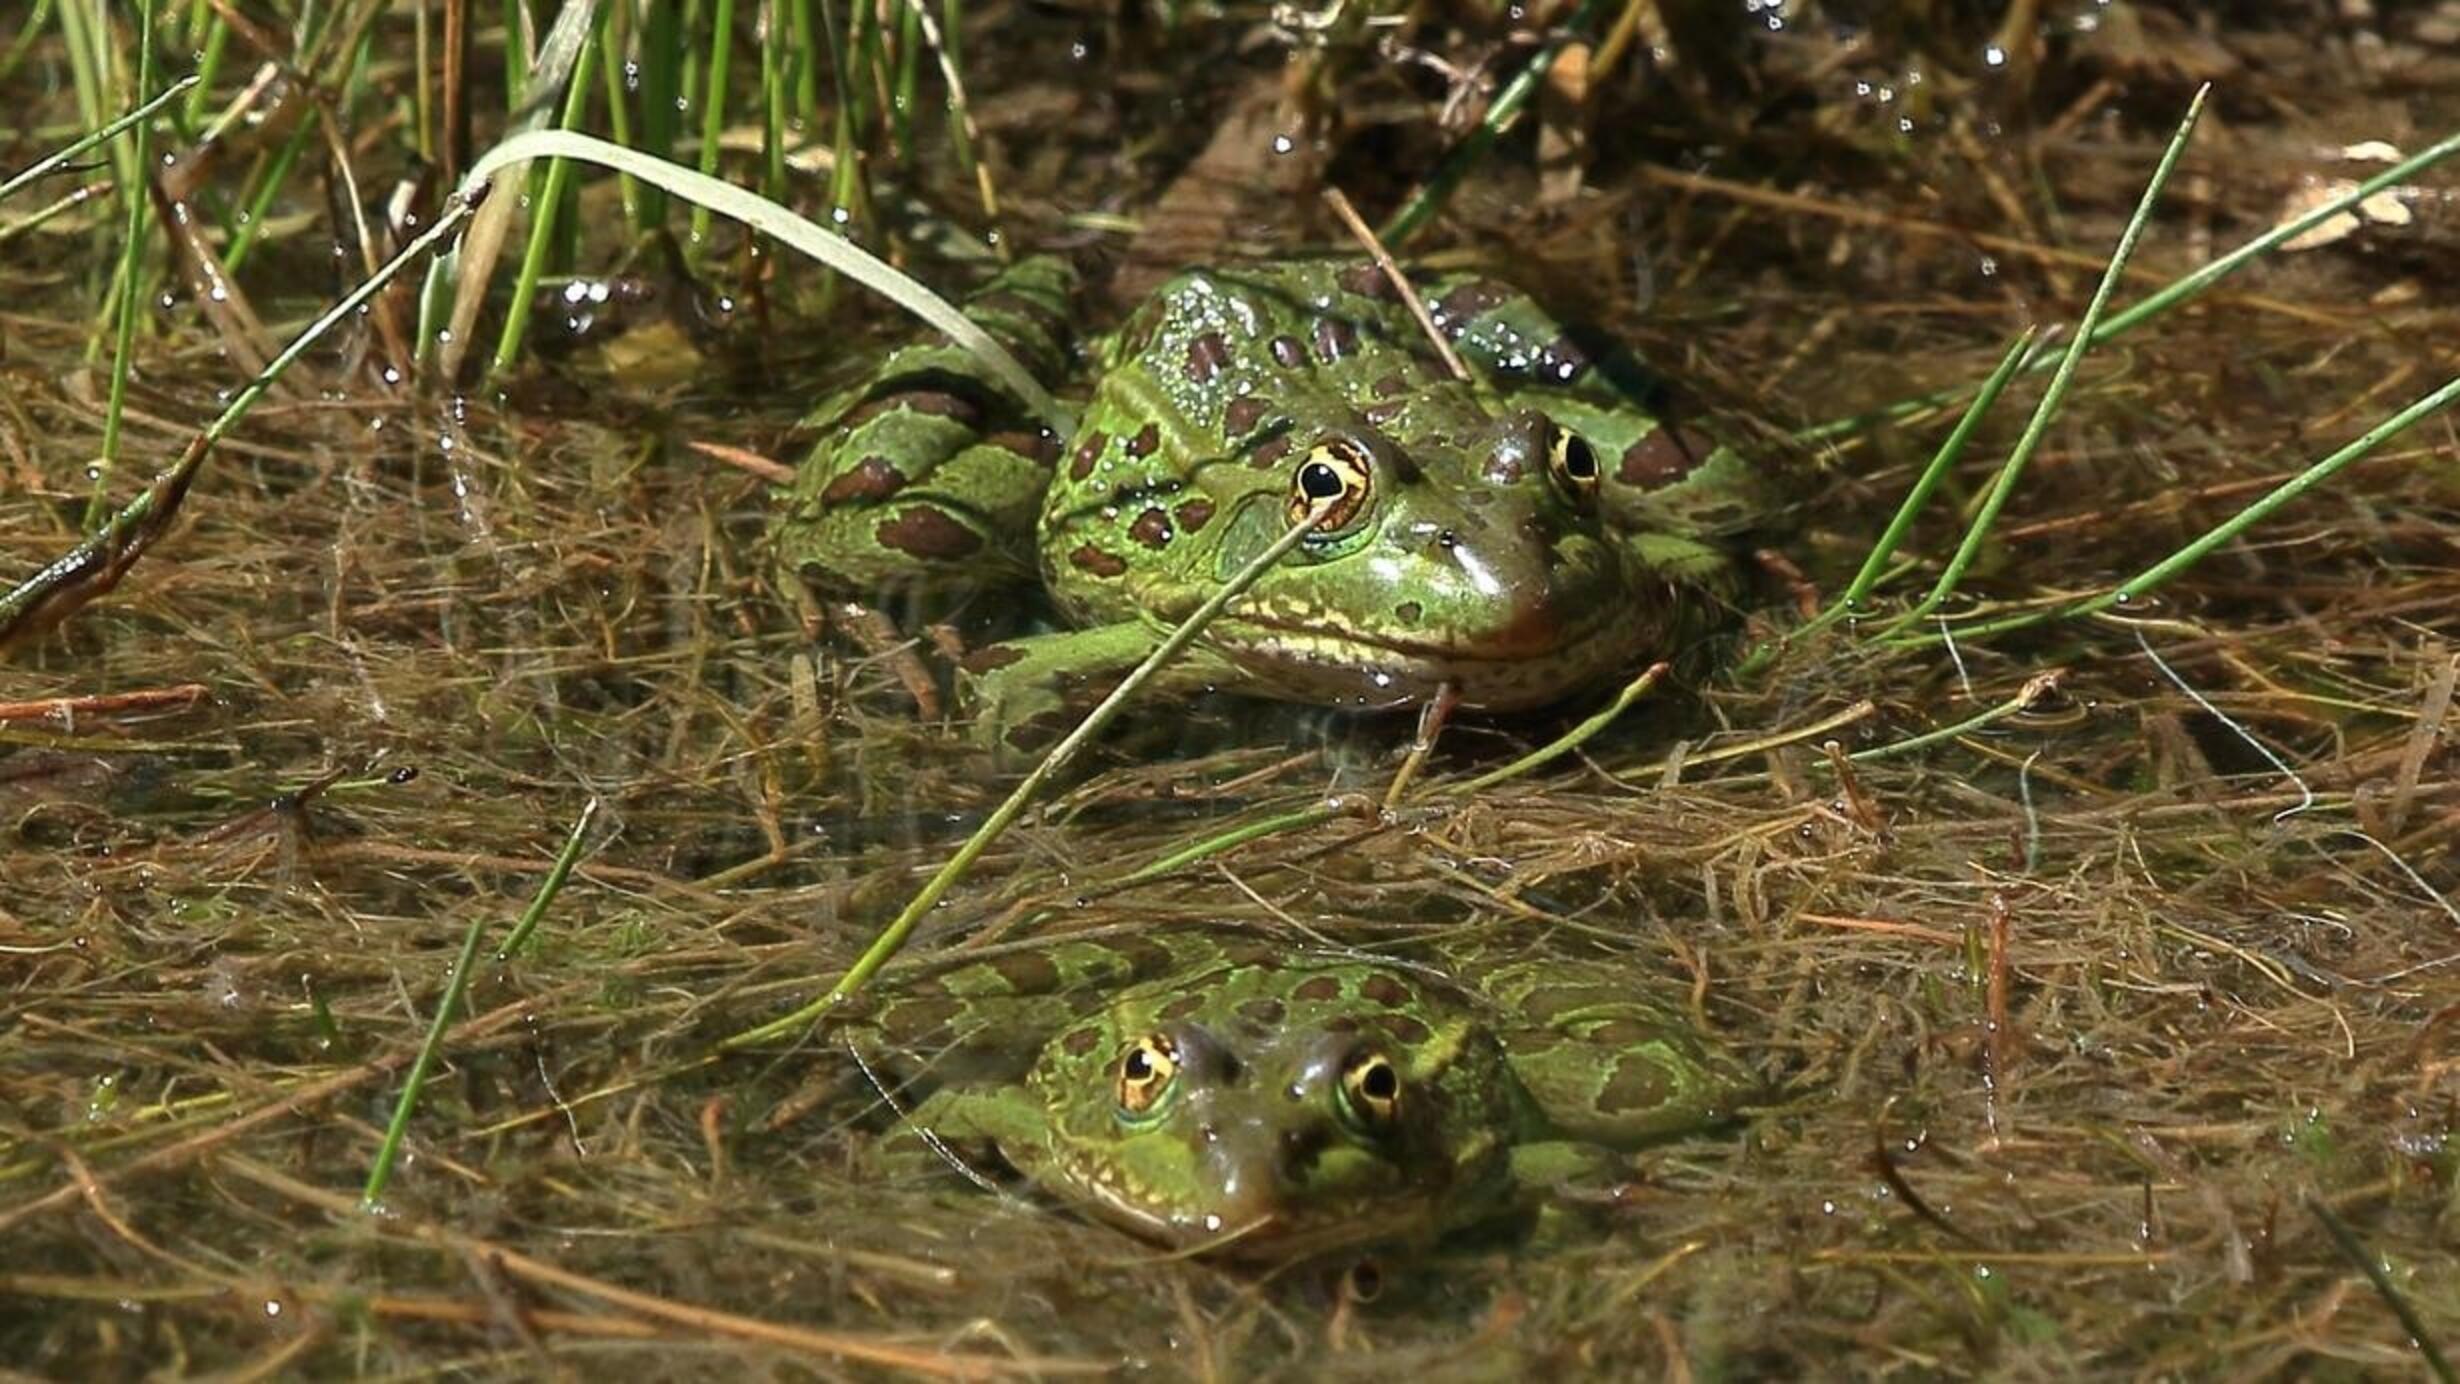 Two green spotted frogs sitting in water